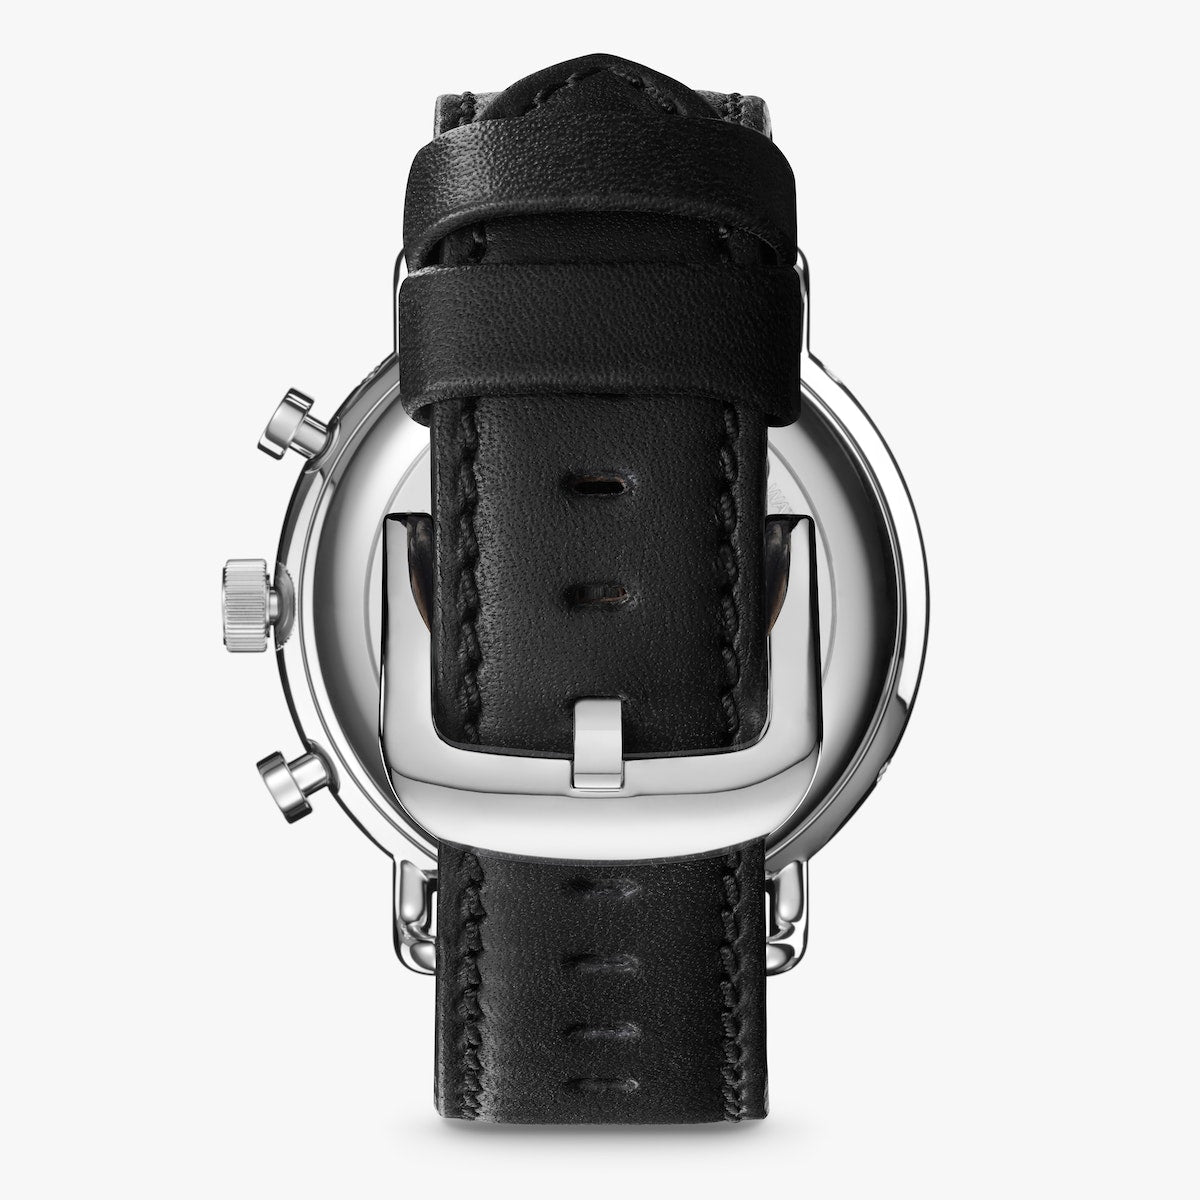 THE CANFIELD SPORT 45MM - BLACK